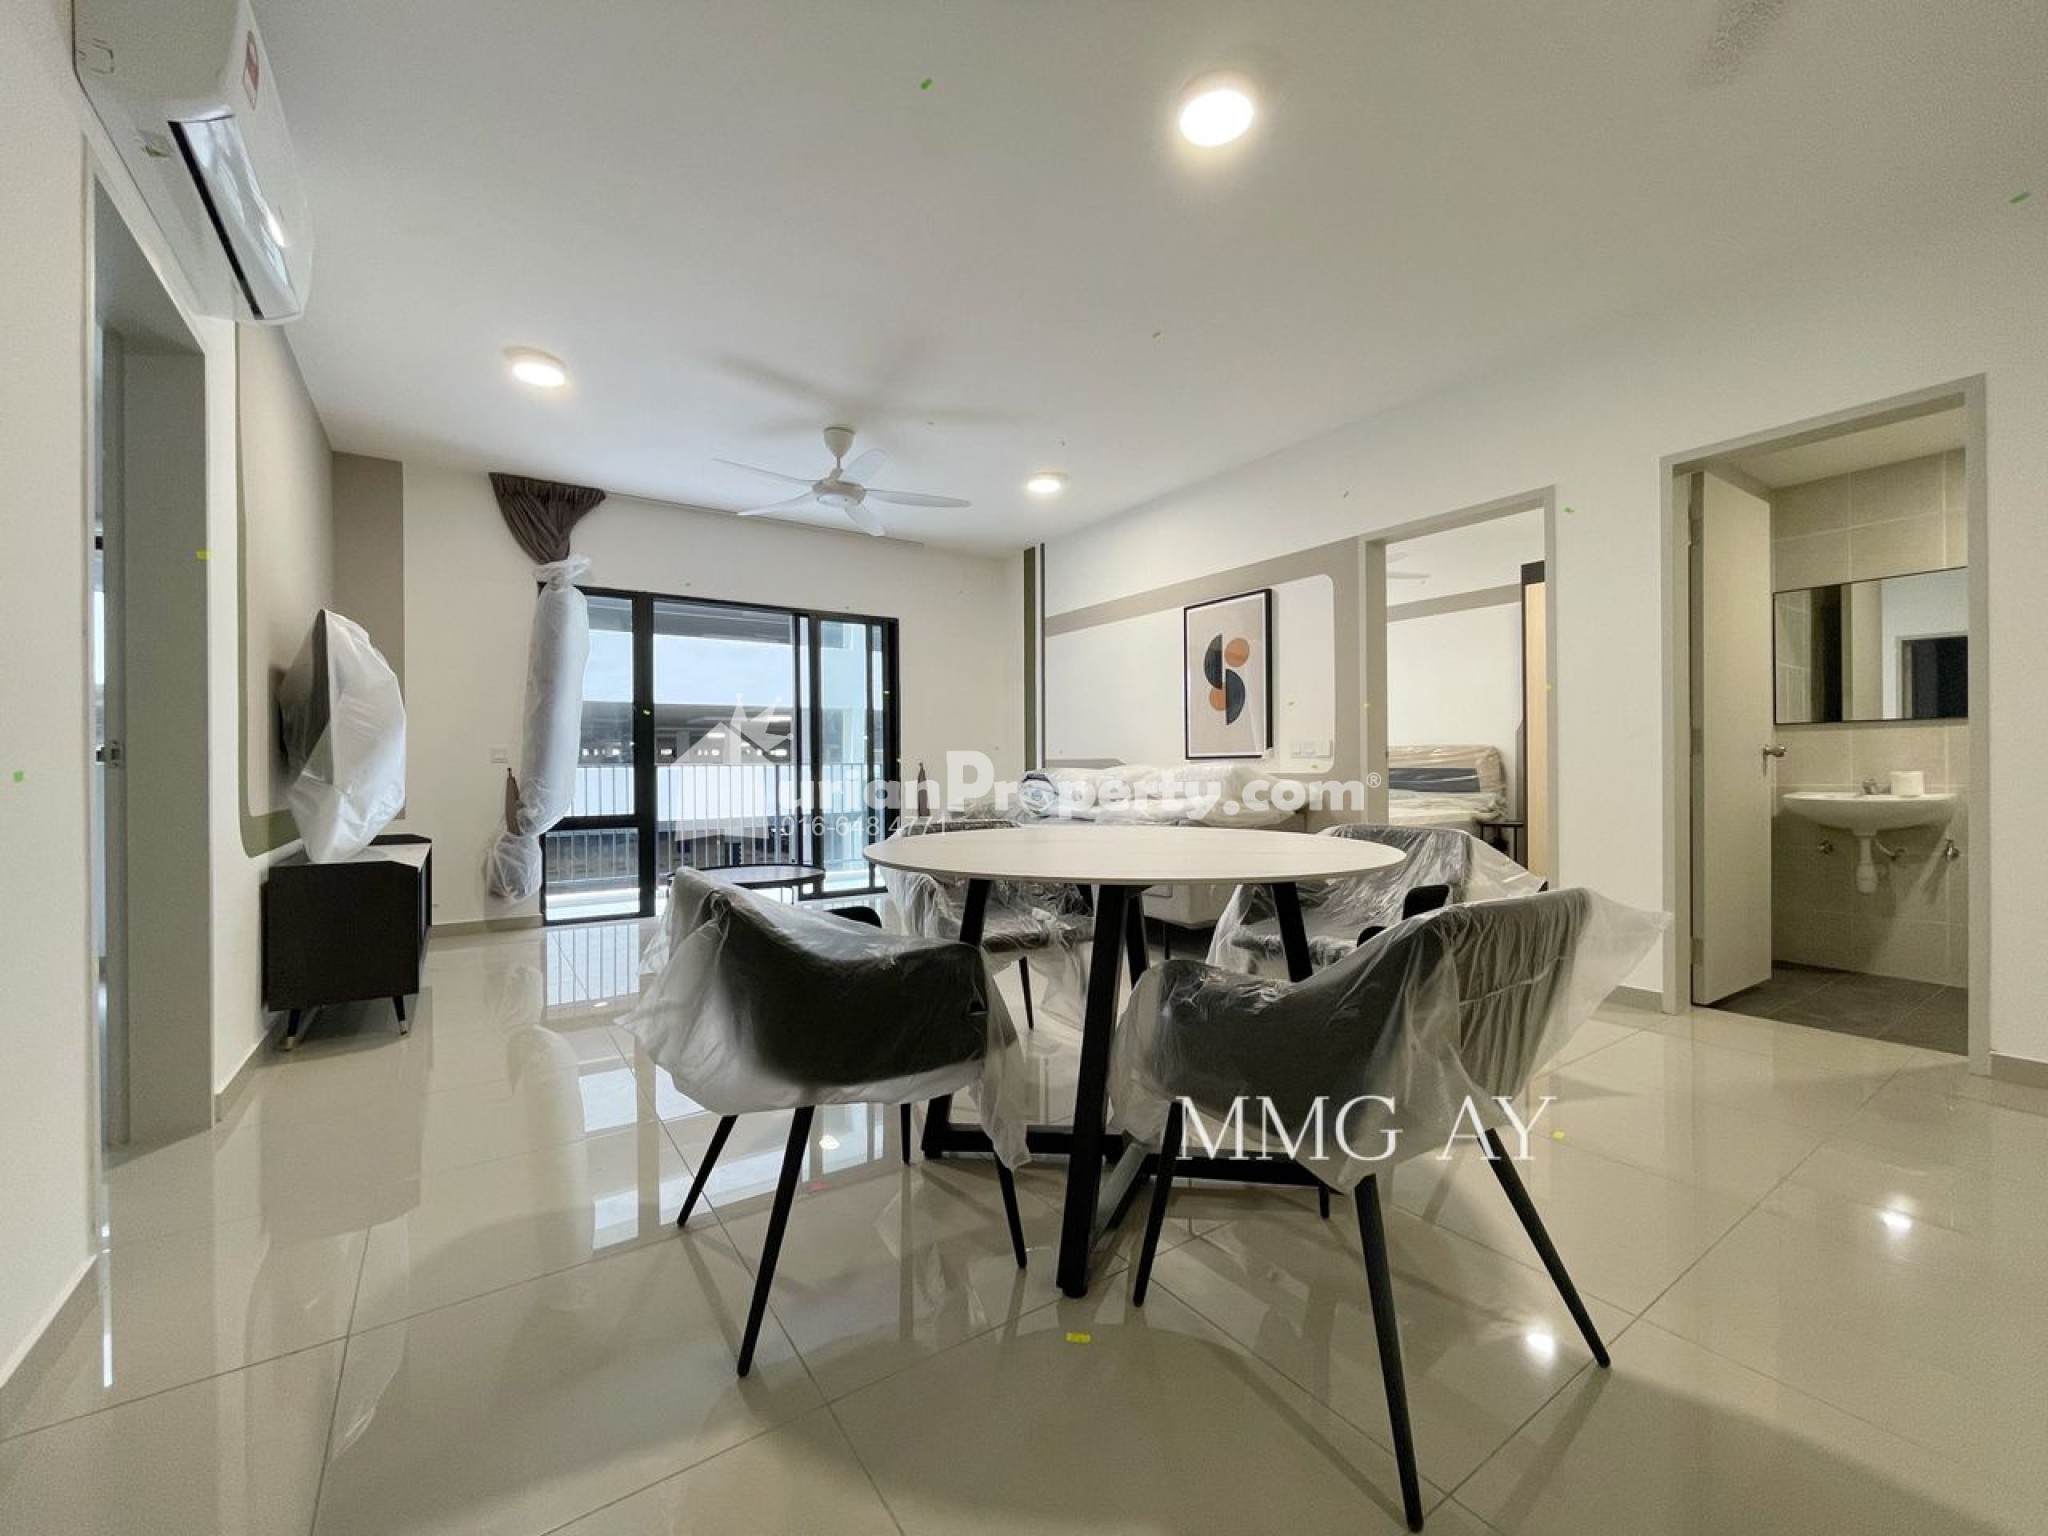 Condo For Rent at Huni'D@Eco Ardence